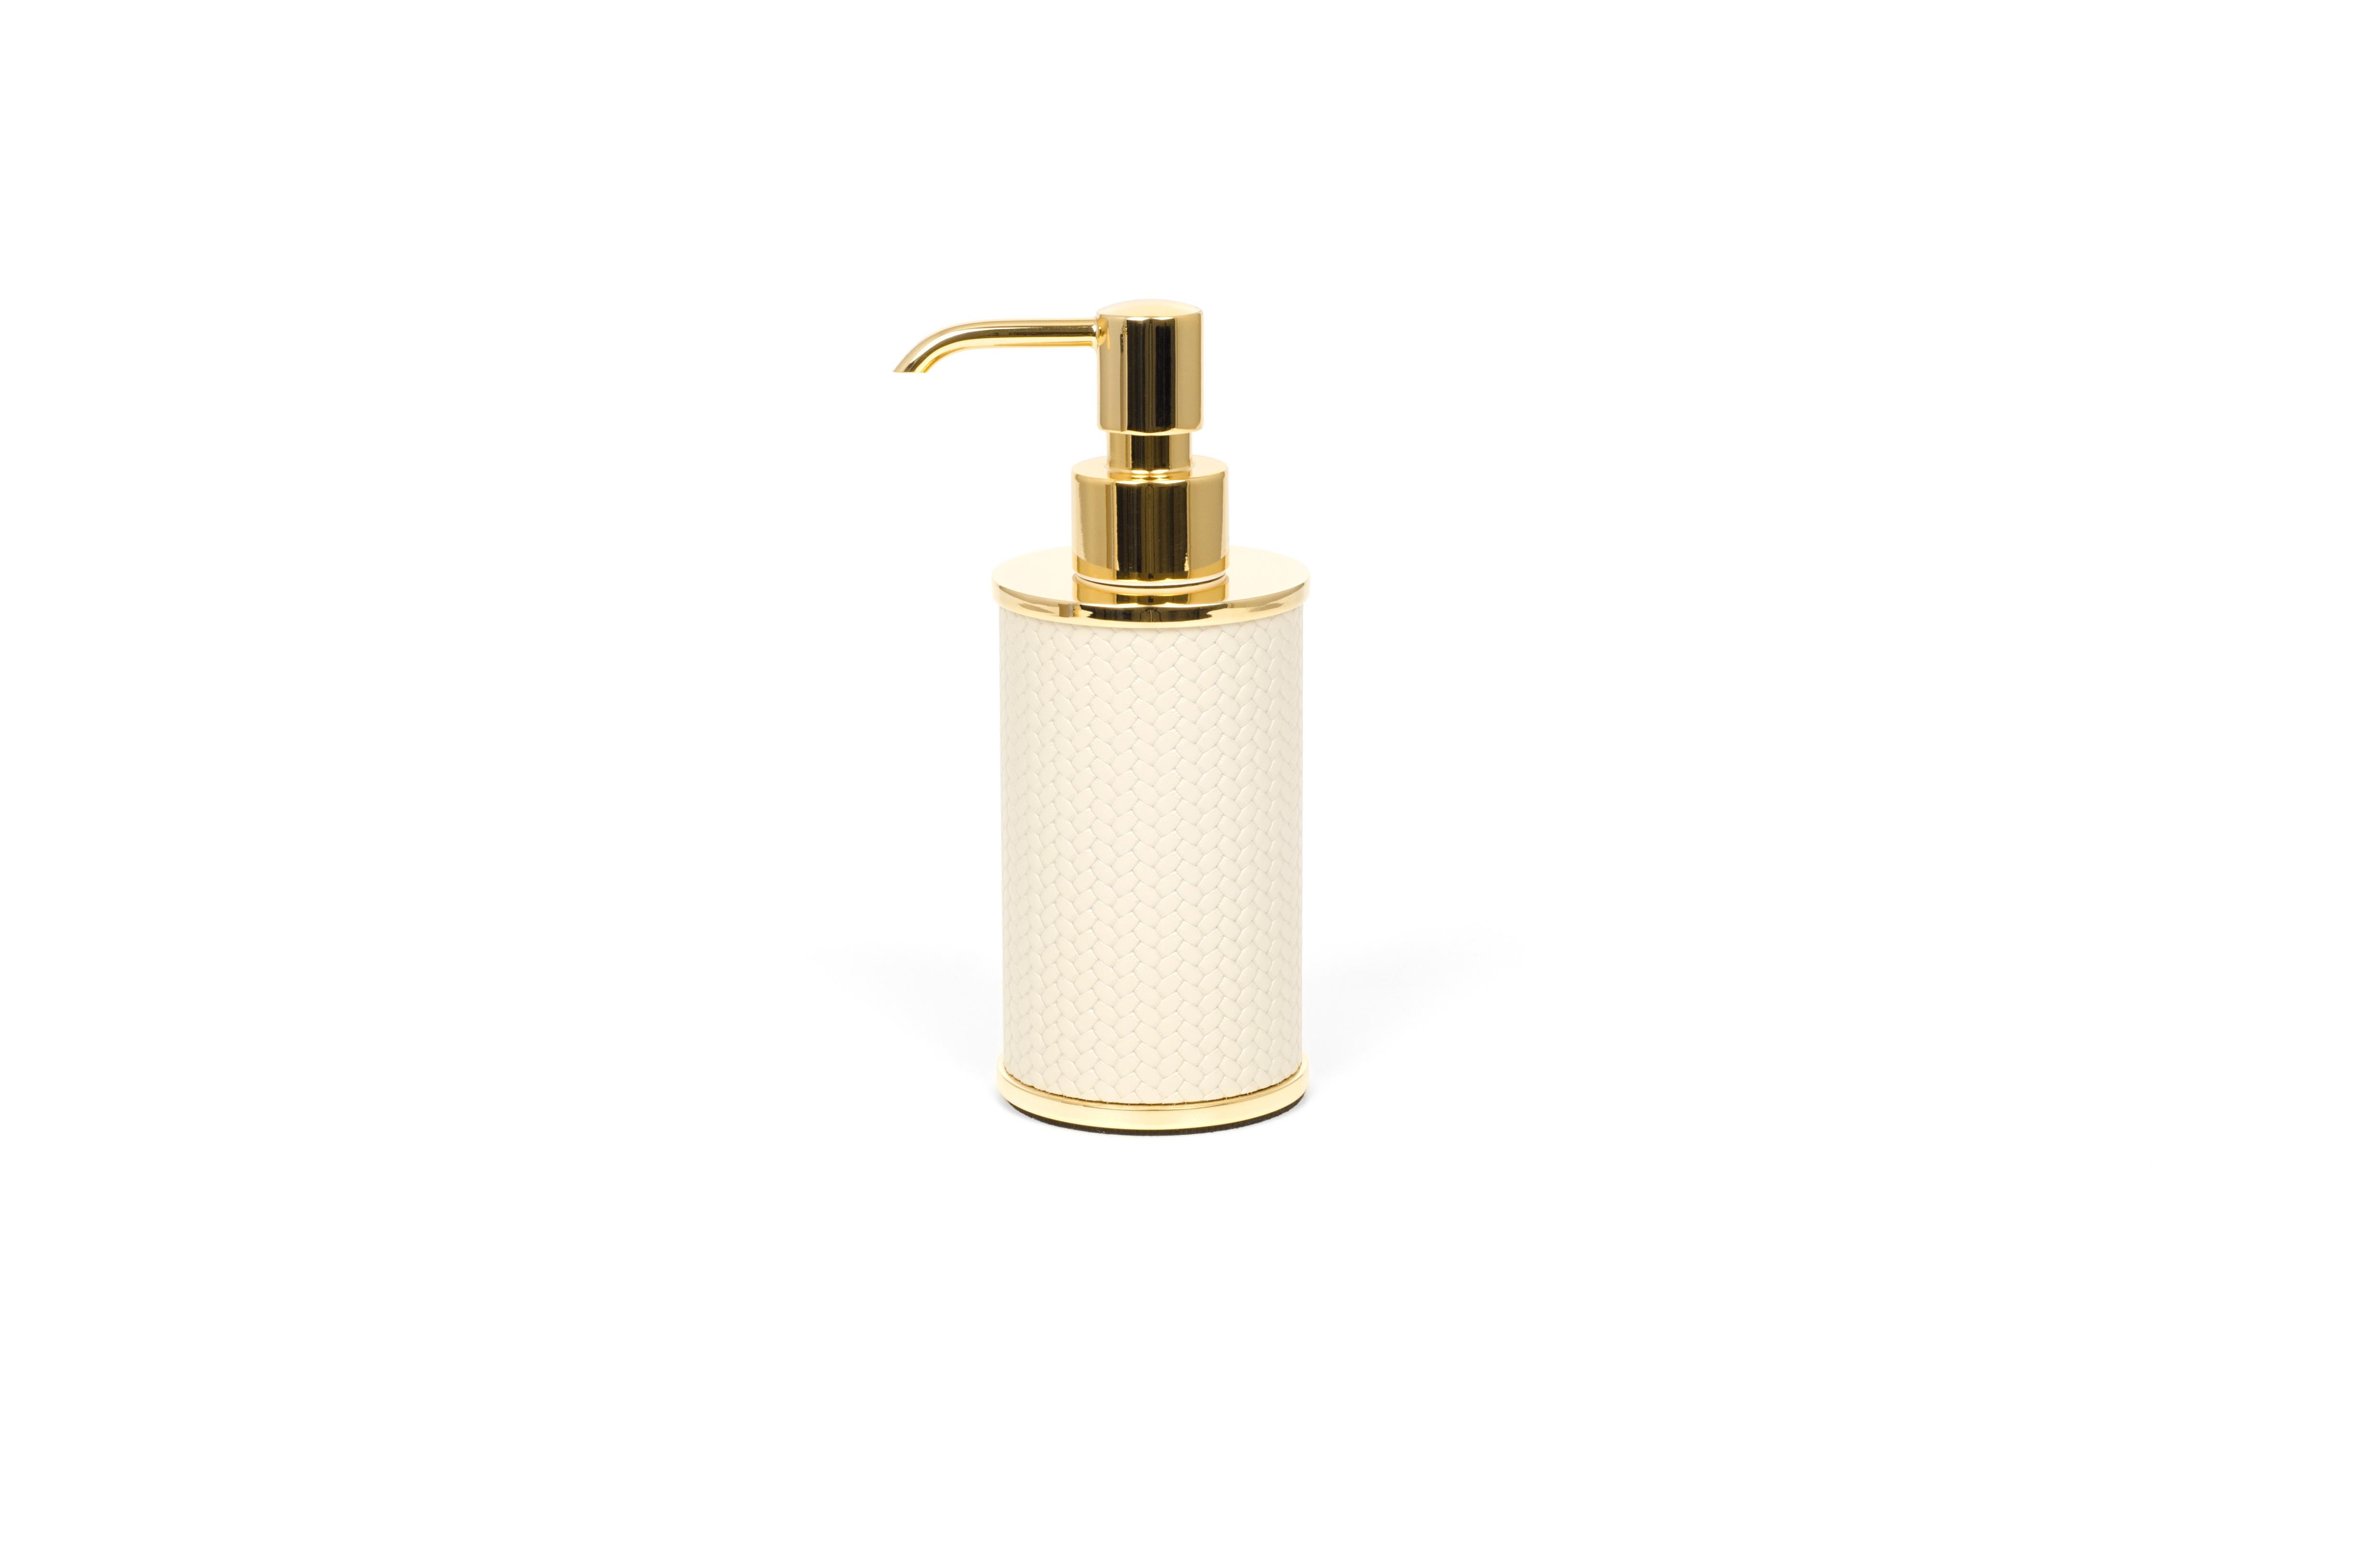 Olimpia, in all its beauty.
A complete set with all the bathroom essentials: A round soap dispenser, a toothbrush holder and a cotton pad holder together displayed on our rectangular tray. Clean, crisp lines with perfect accents made in chrome,